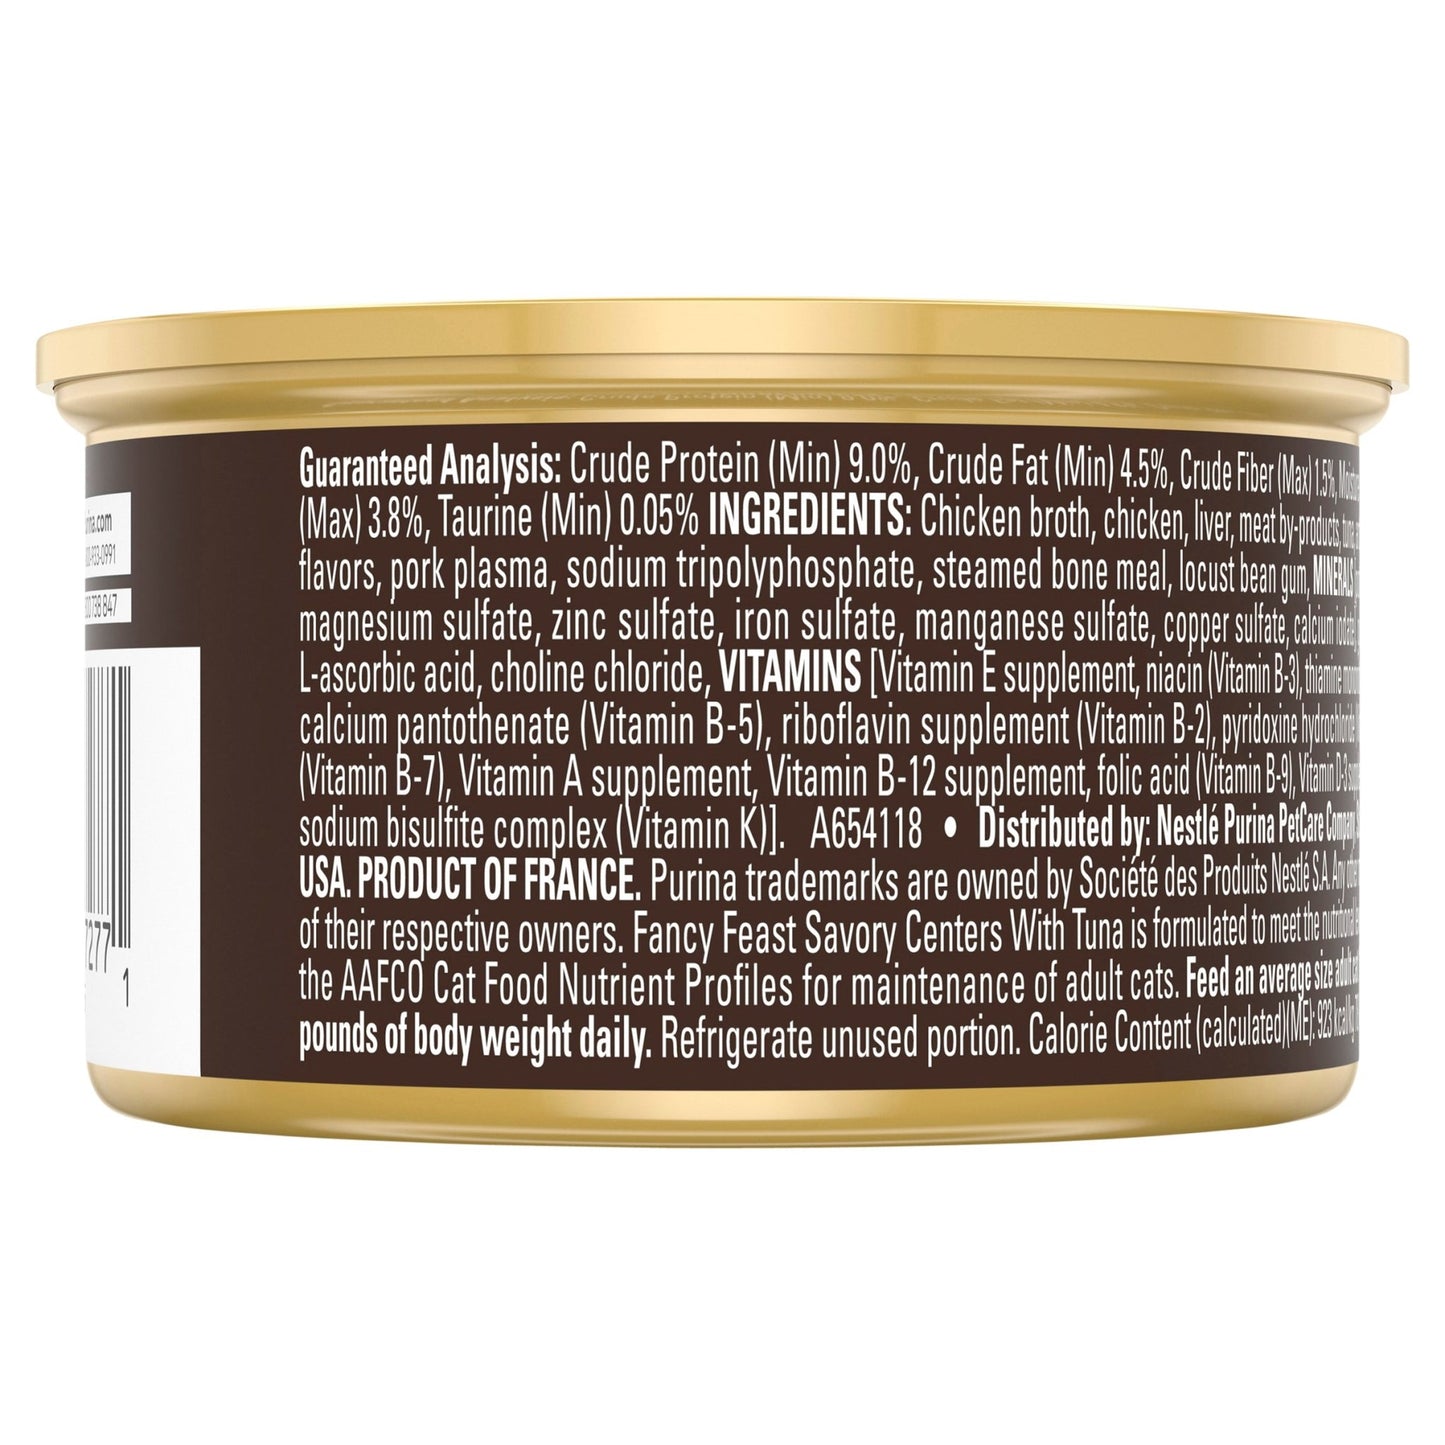 Fancy Feast Savory Centers Pate With Tuna and a Gourmet Gravy Center 24x85g - Woonona Petfood & Produce